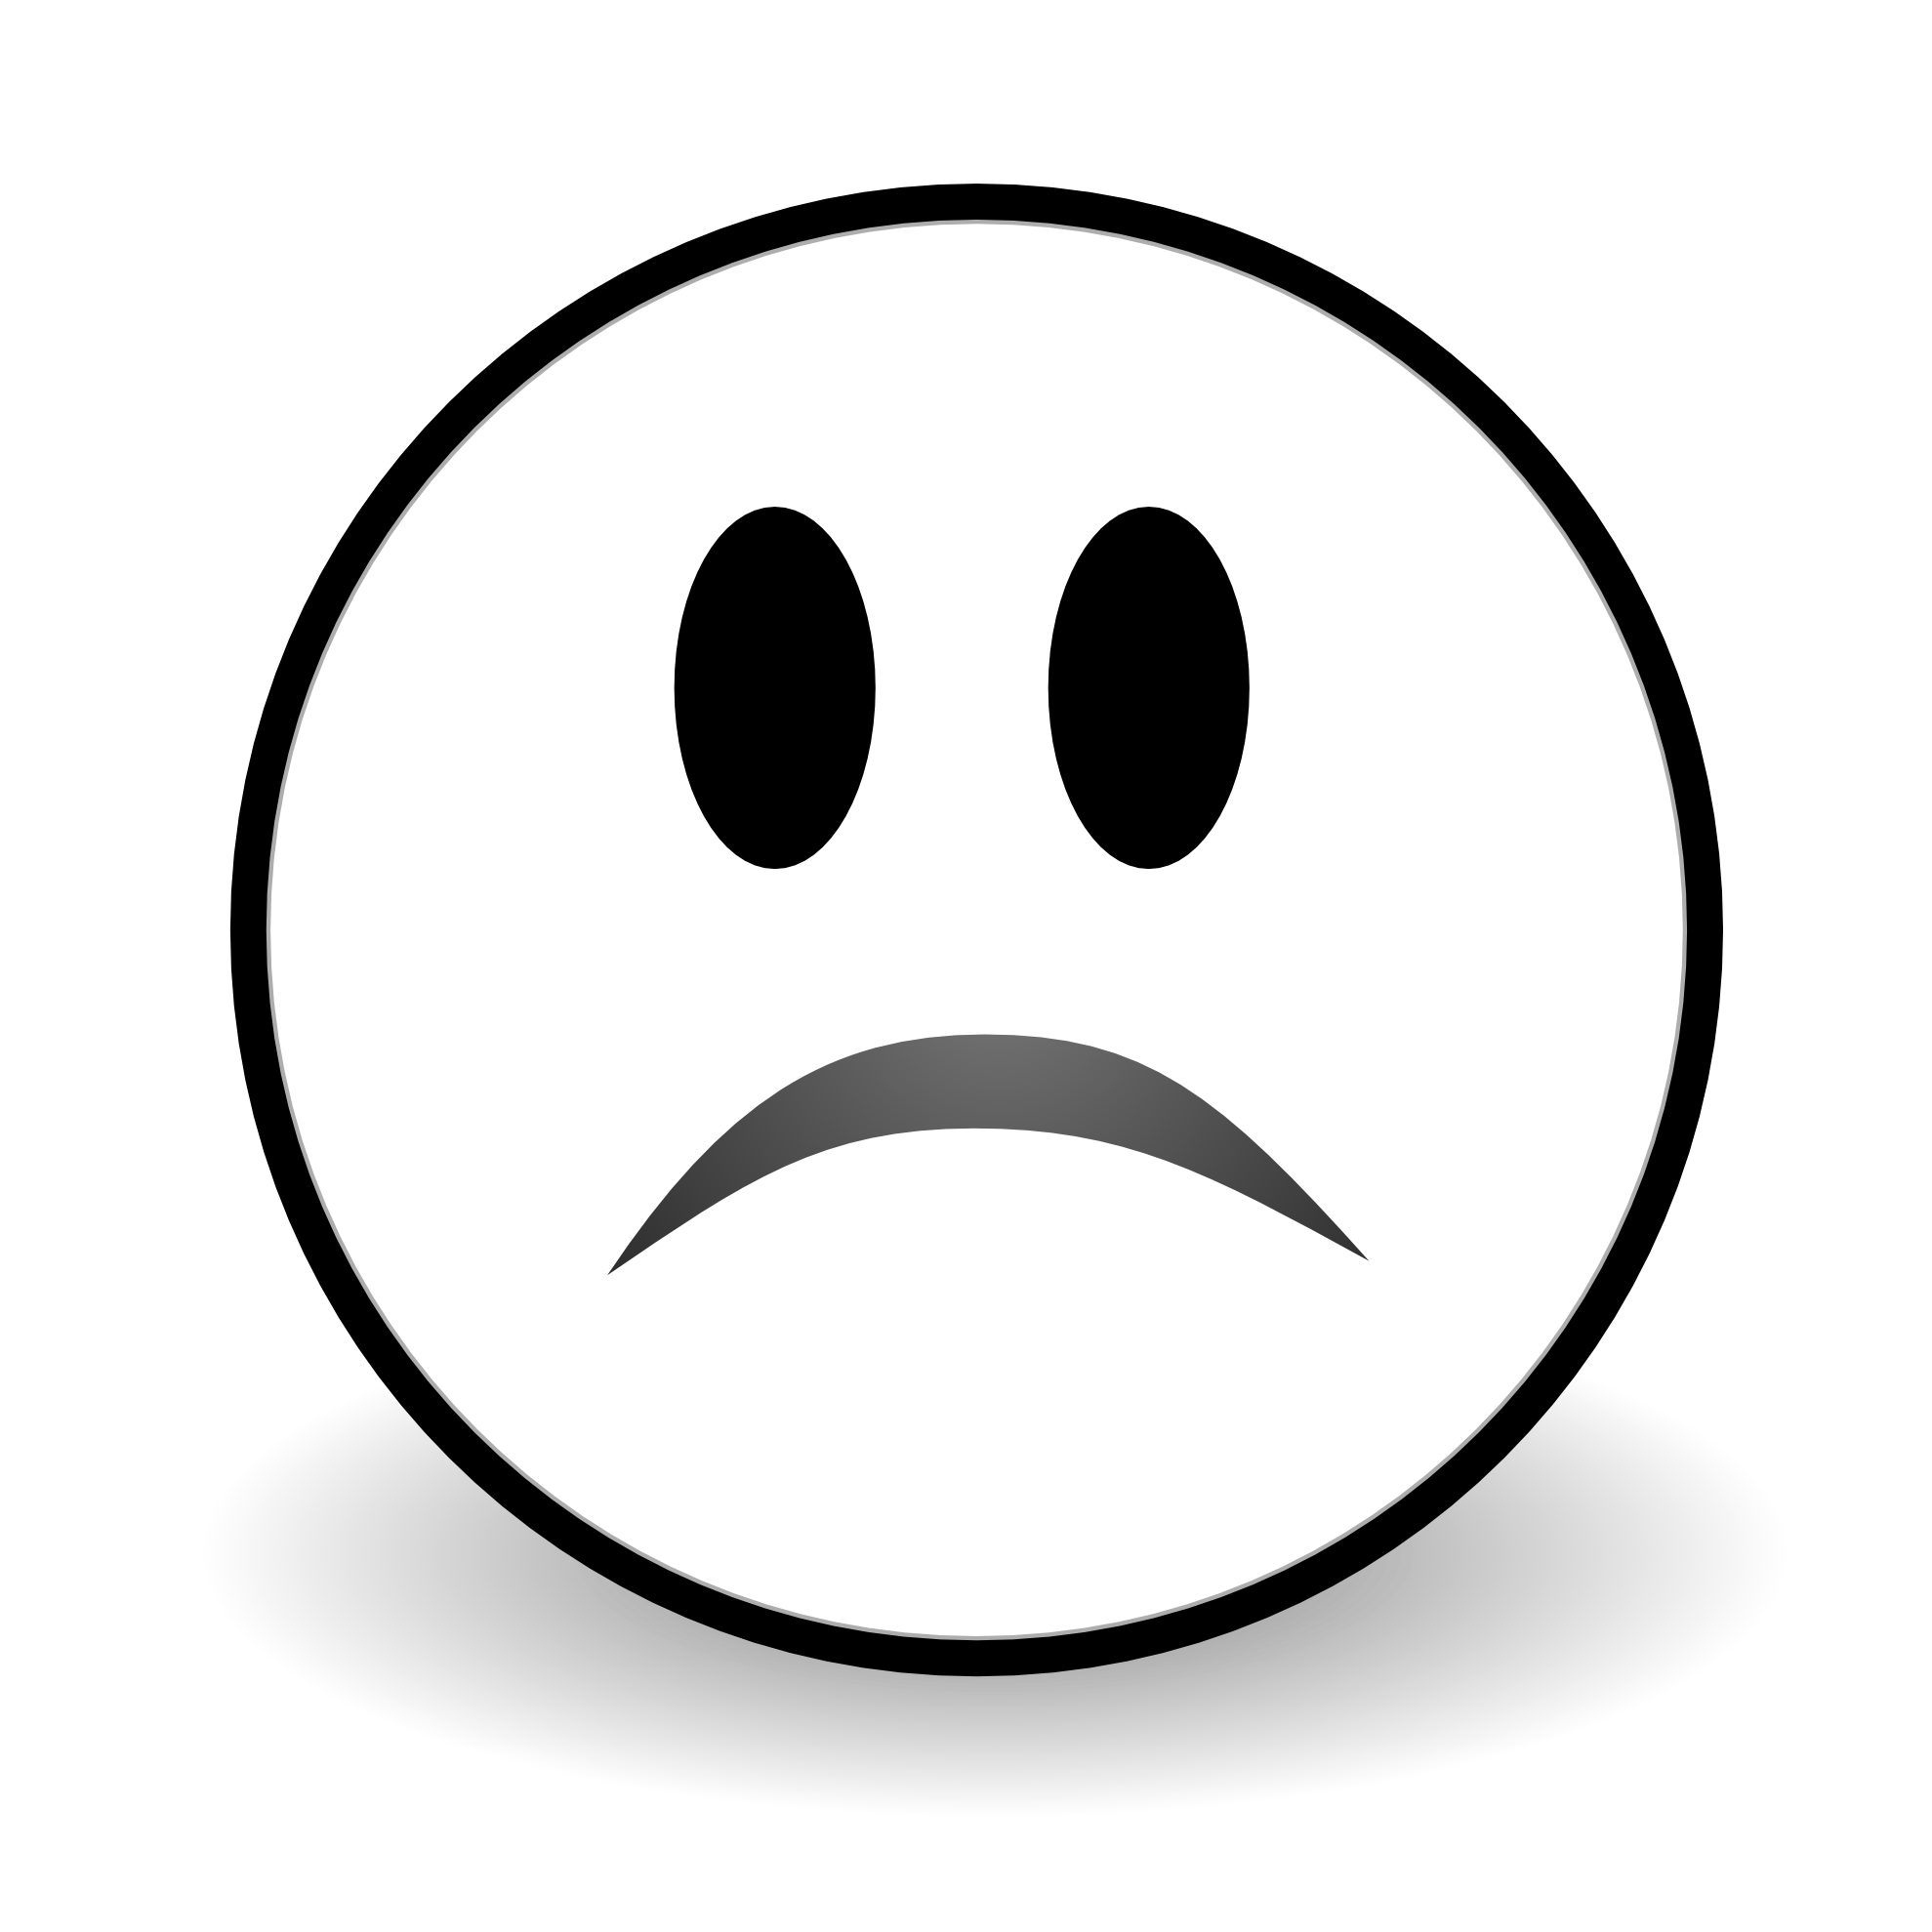 Sad Face Colouring Pages Coloring Pages For Kids And For Adults